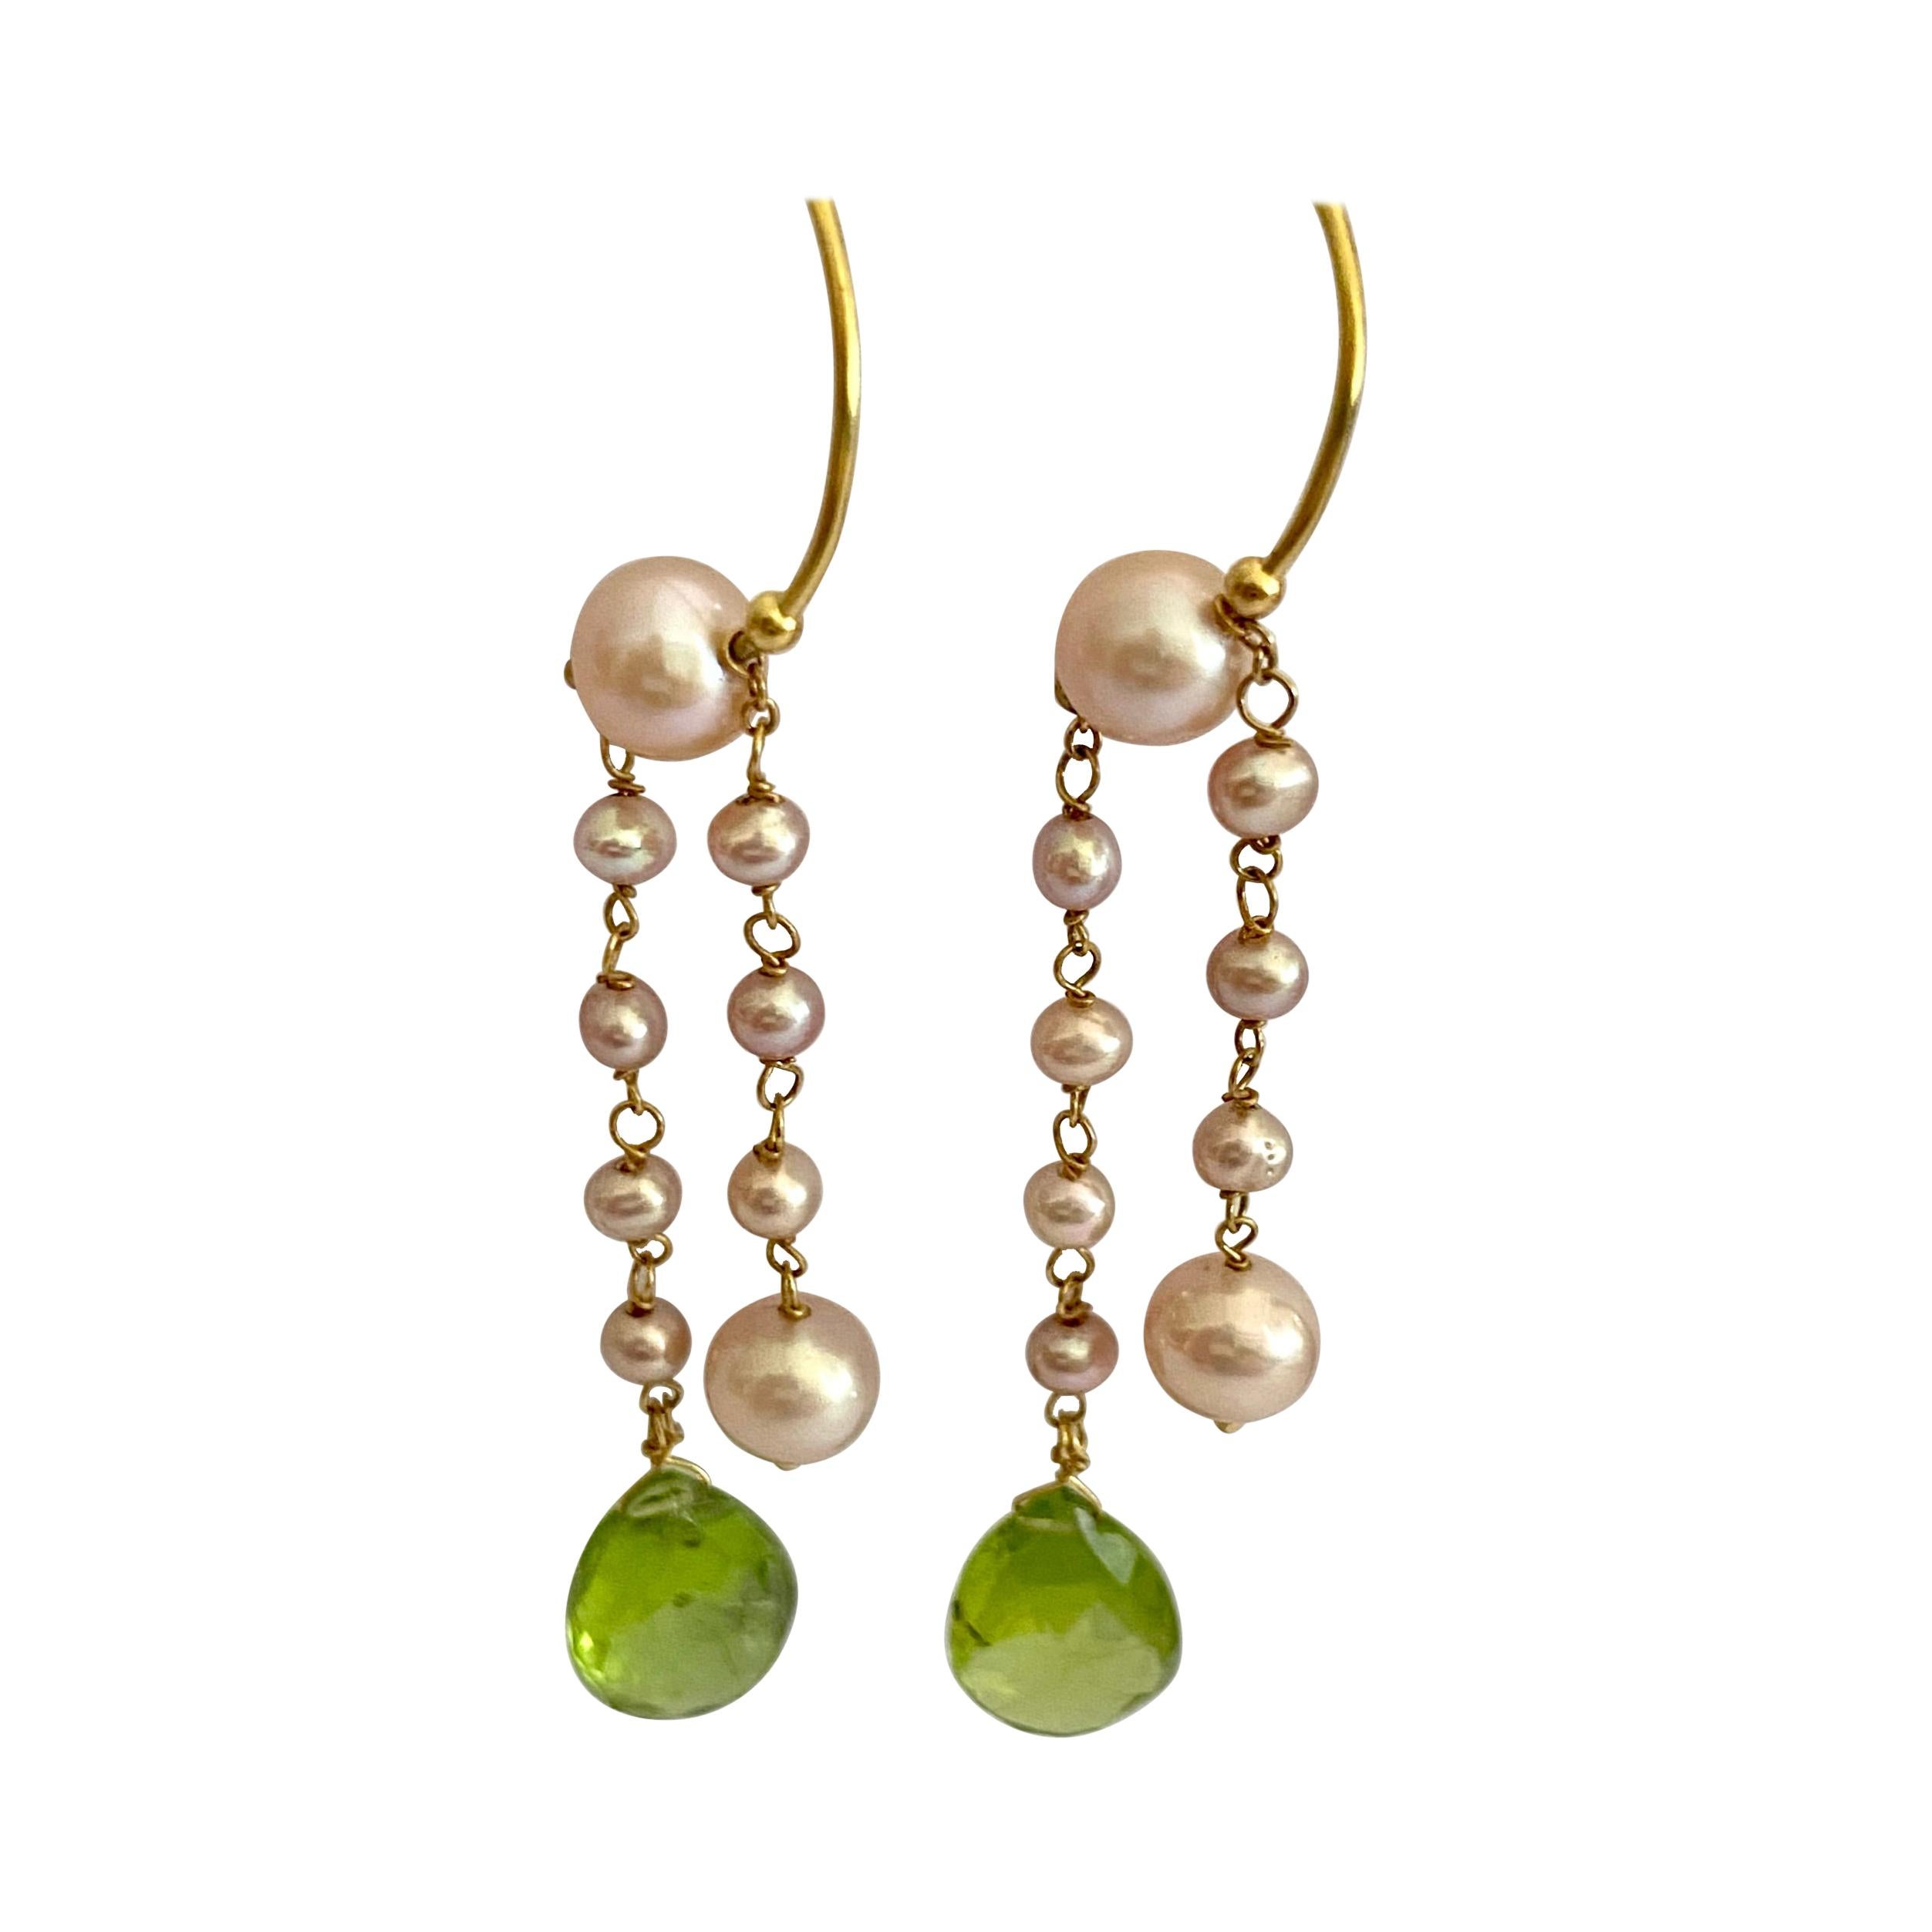 Handmade Earrings, Peridot Stone and 9 Freshwater Cultured Pearls, Made in Italy